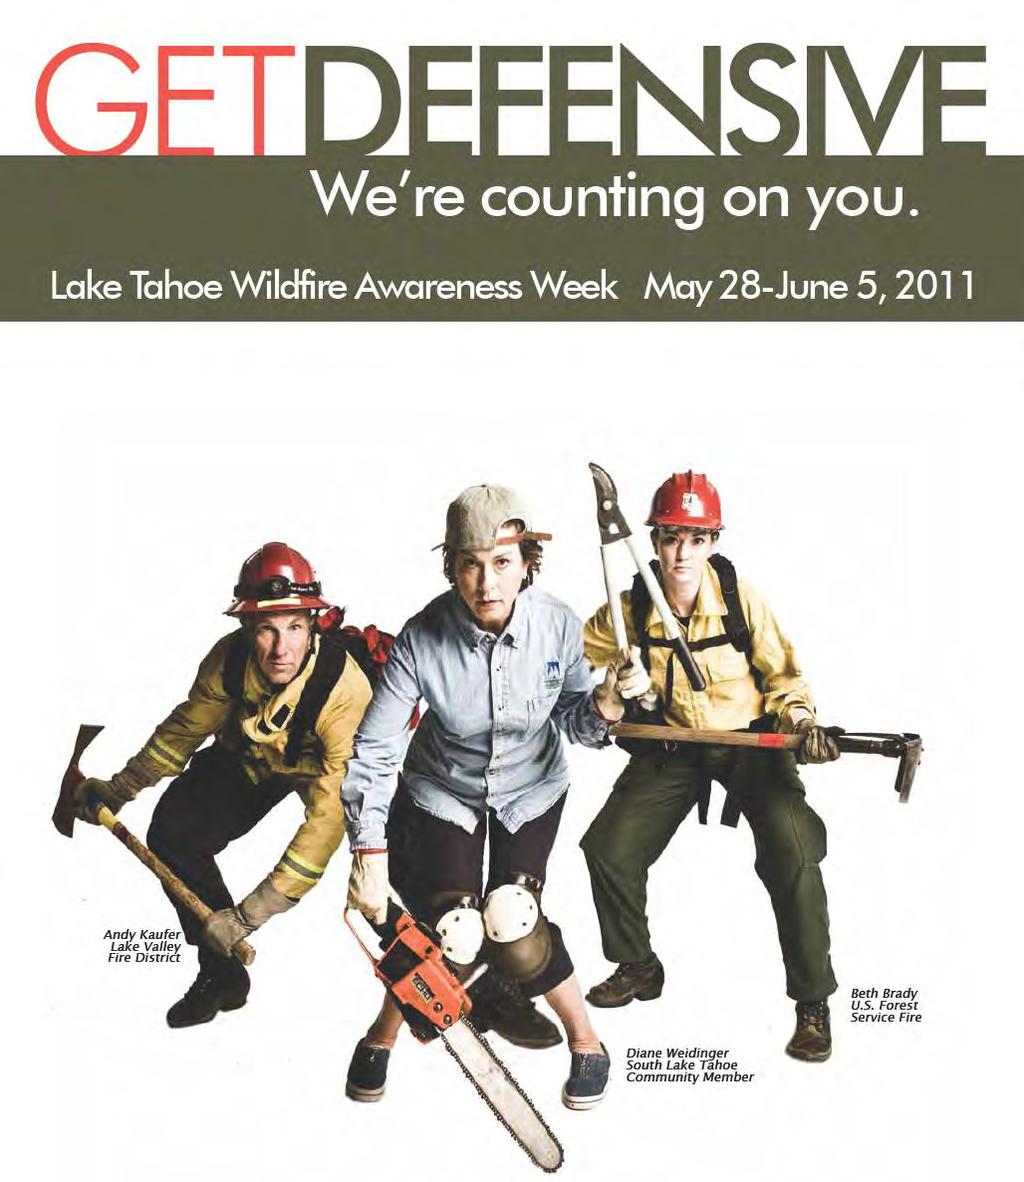 Lake Tahoe Basin Wildfire Awareness Week 2011 Summary Report January 2012 The Lake Tahoe Basin Wildfire Awareness Week is funded by a grant from